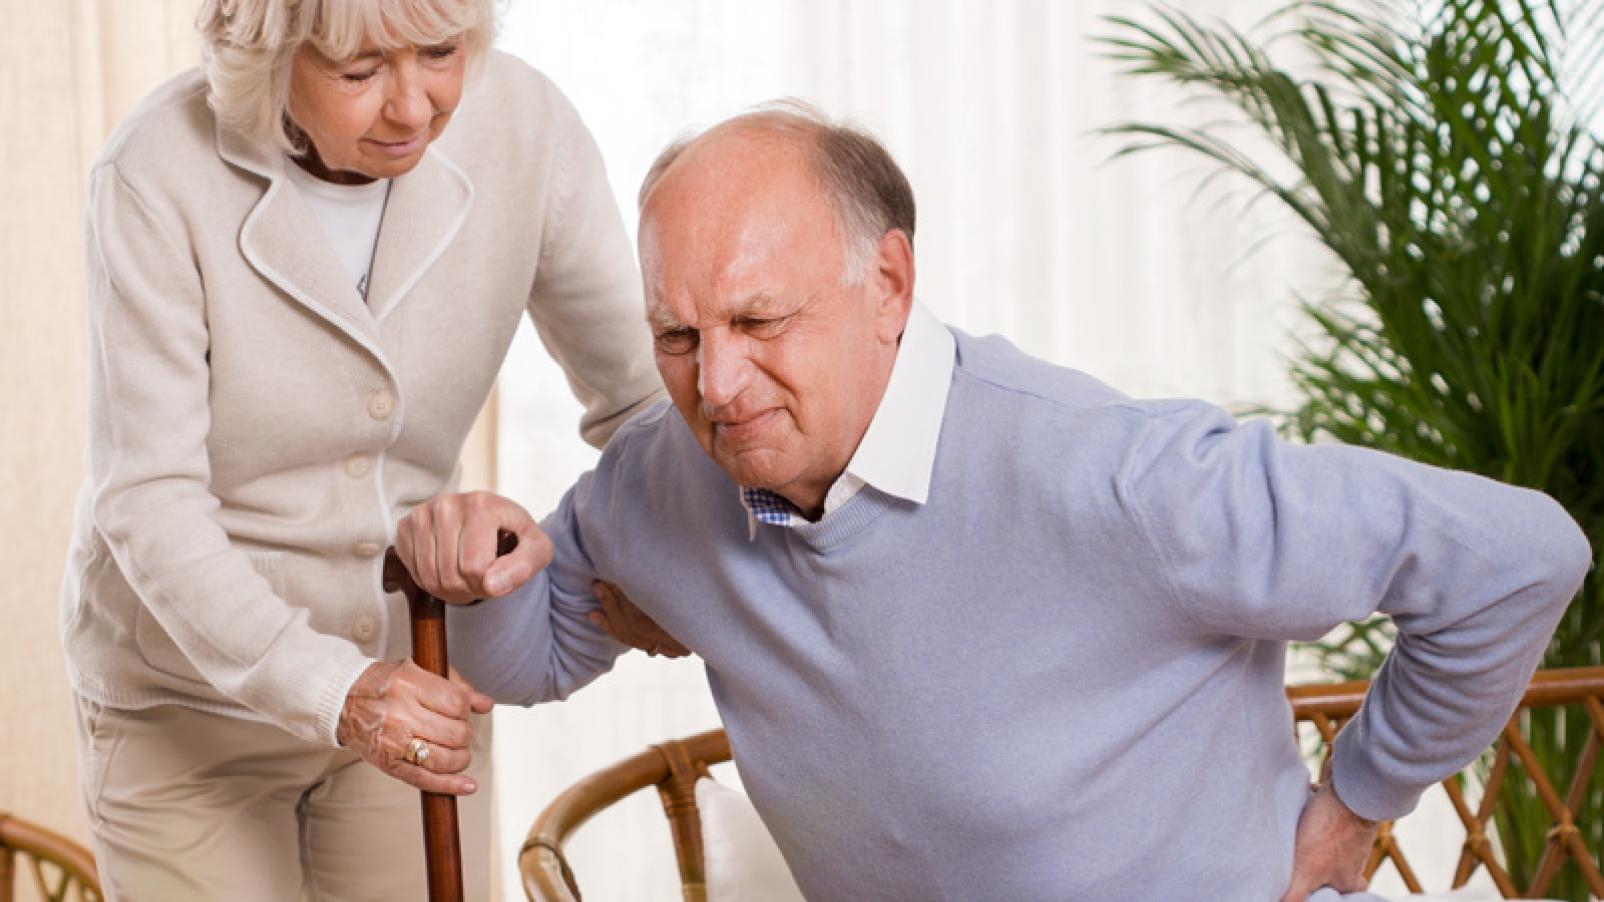 Elderly man with back pain being assisted by his wife